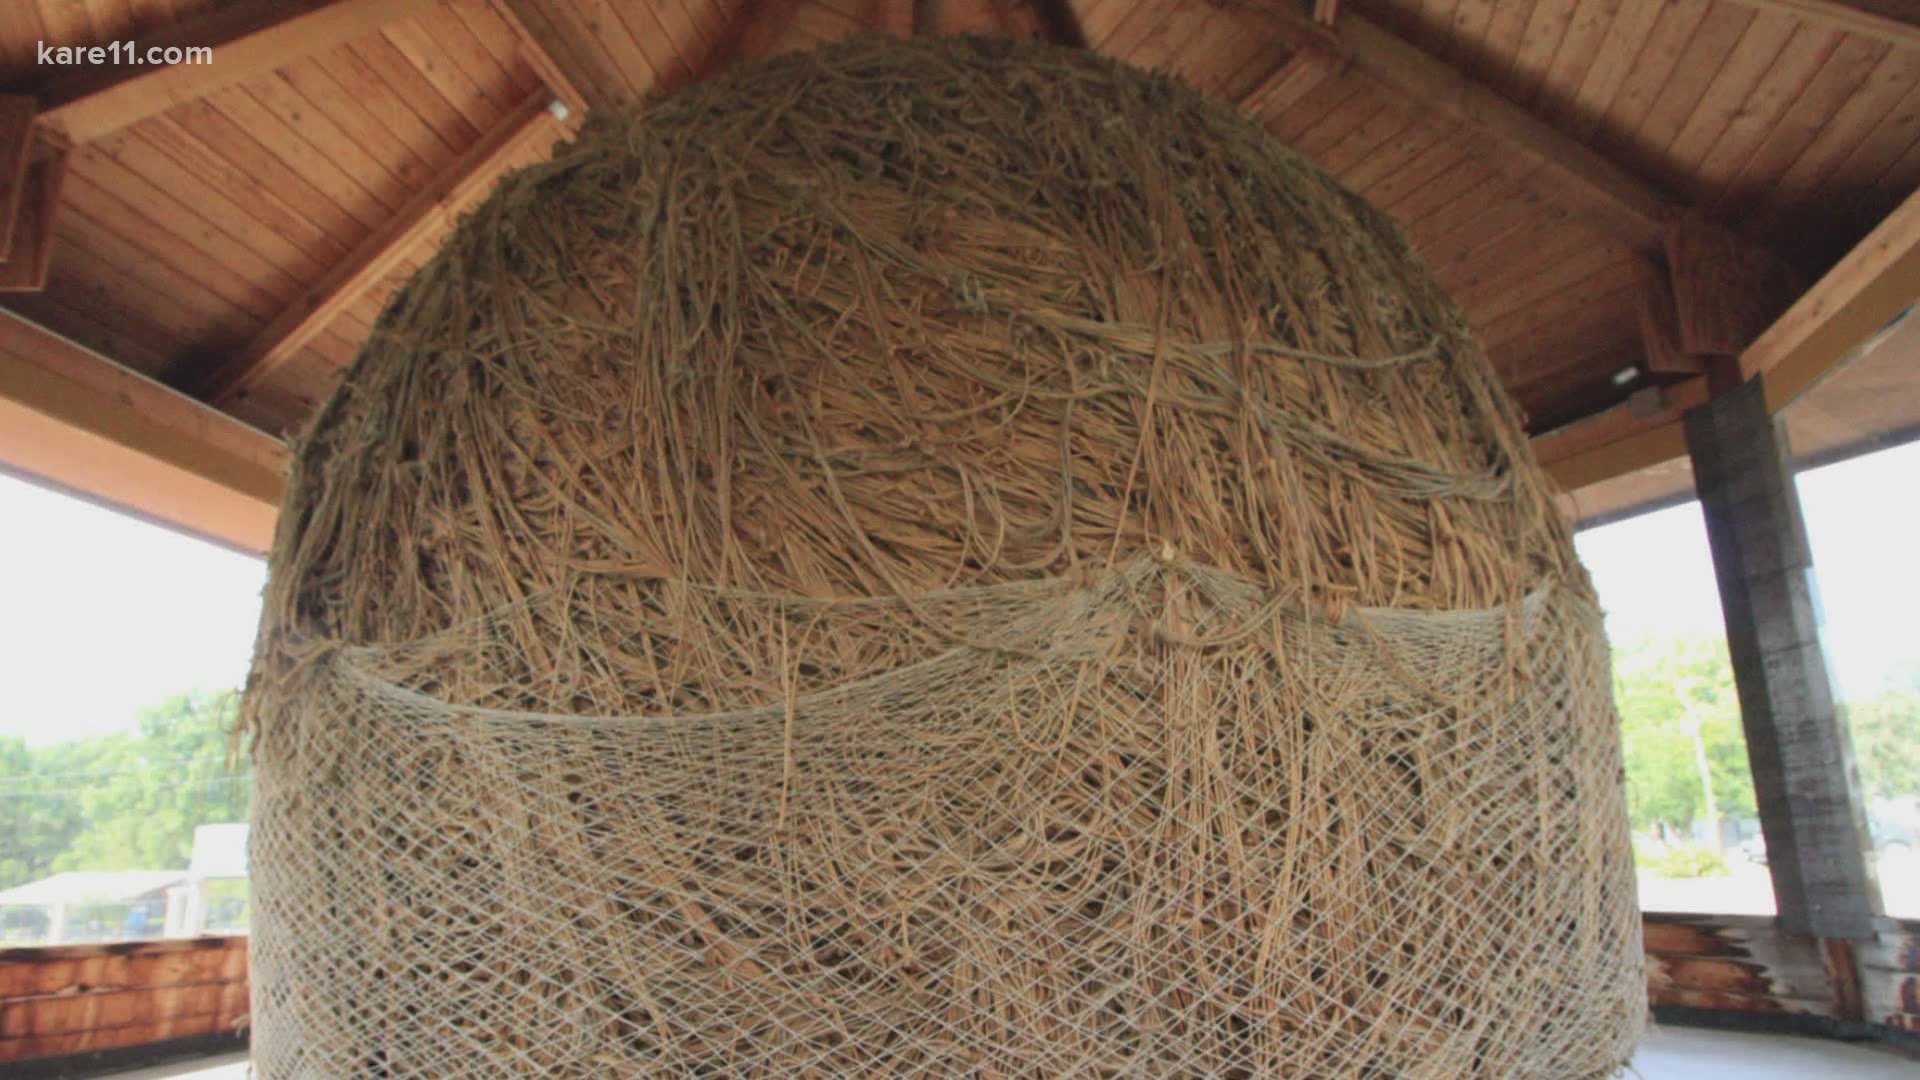 Yes, we visited the biggest ball of twine in Minnesotaaaa...all the way in Darwin.